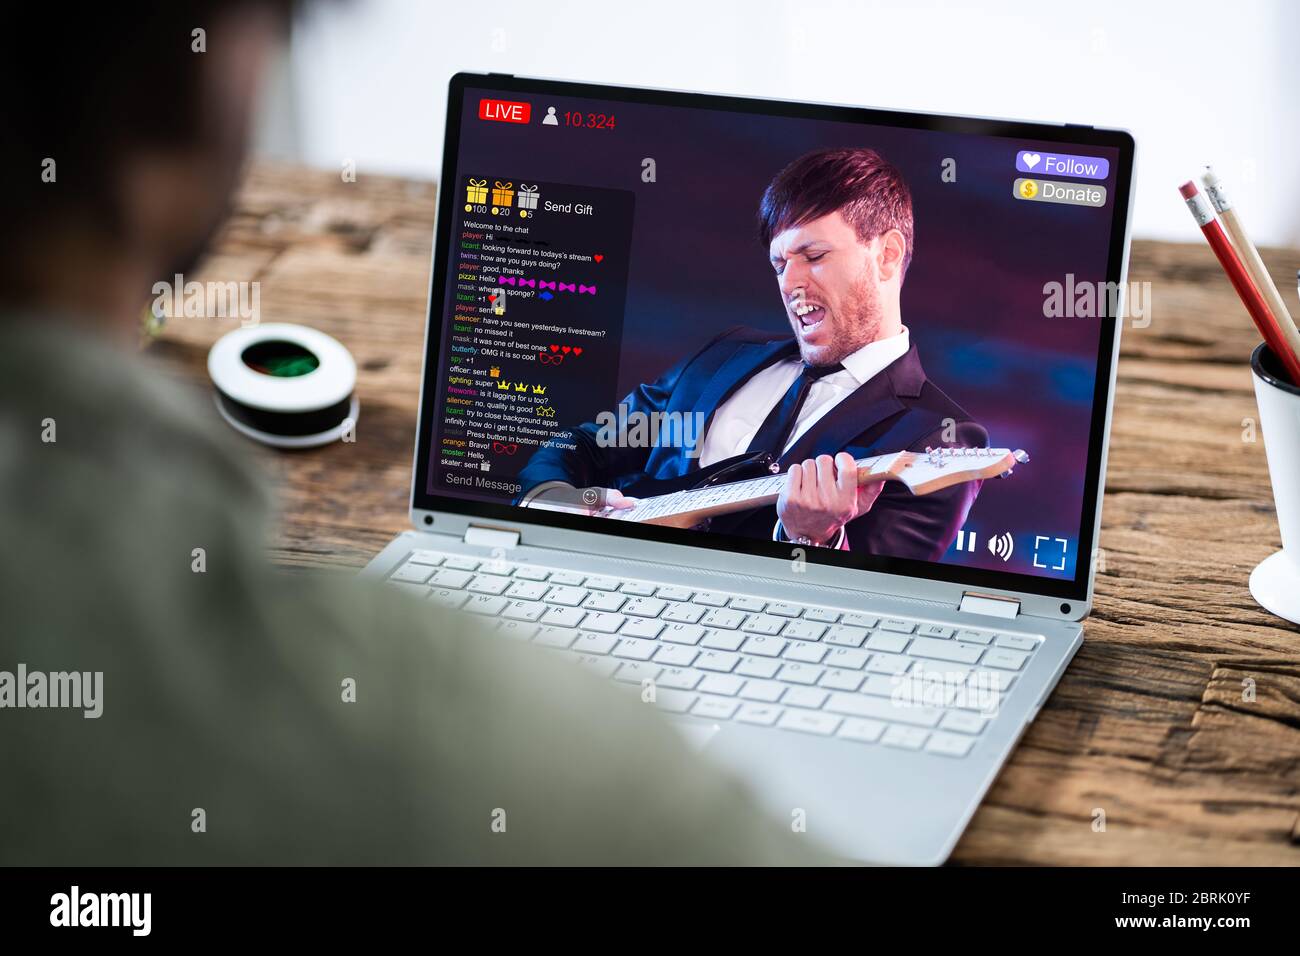 Streaming Live Music Video With Singer On Laptop Computer Stock Photo